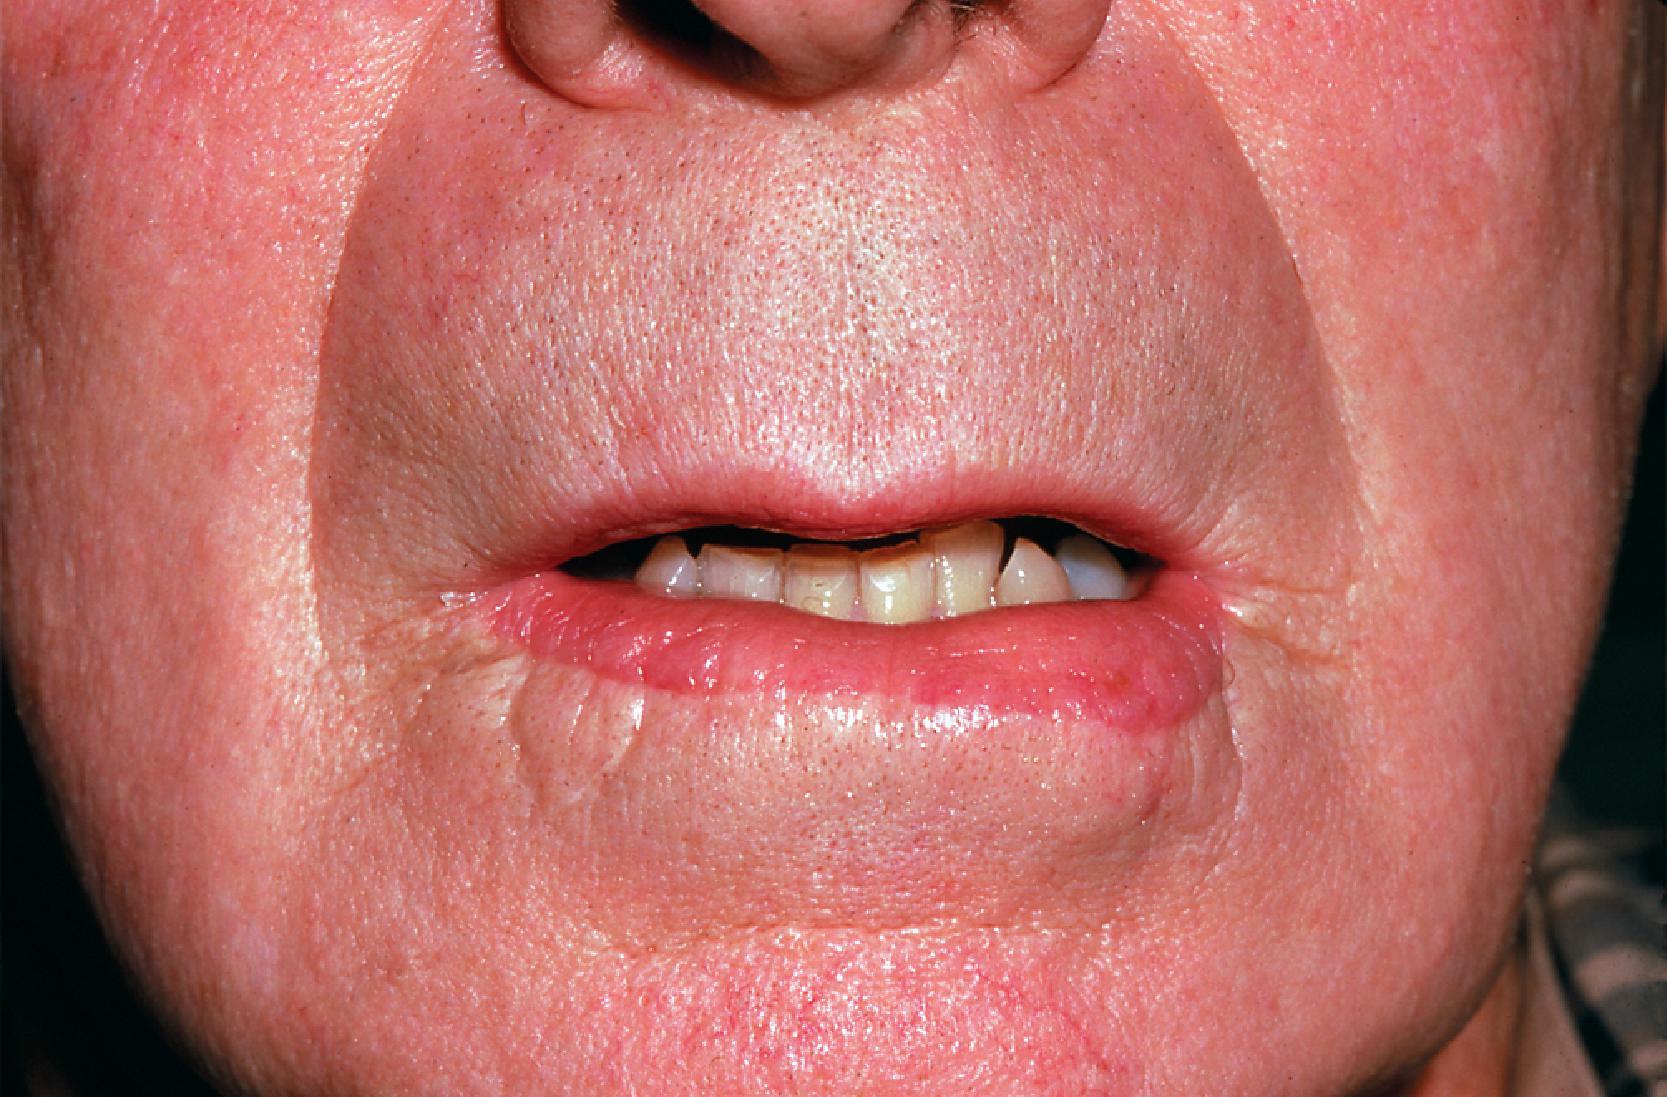 FIG. 19.5, Mucosal advancement flap used to reconstruct inferior vermilion. Color is darker red than natural vermilion.